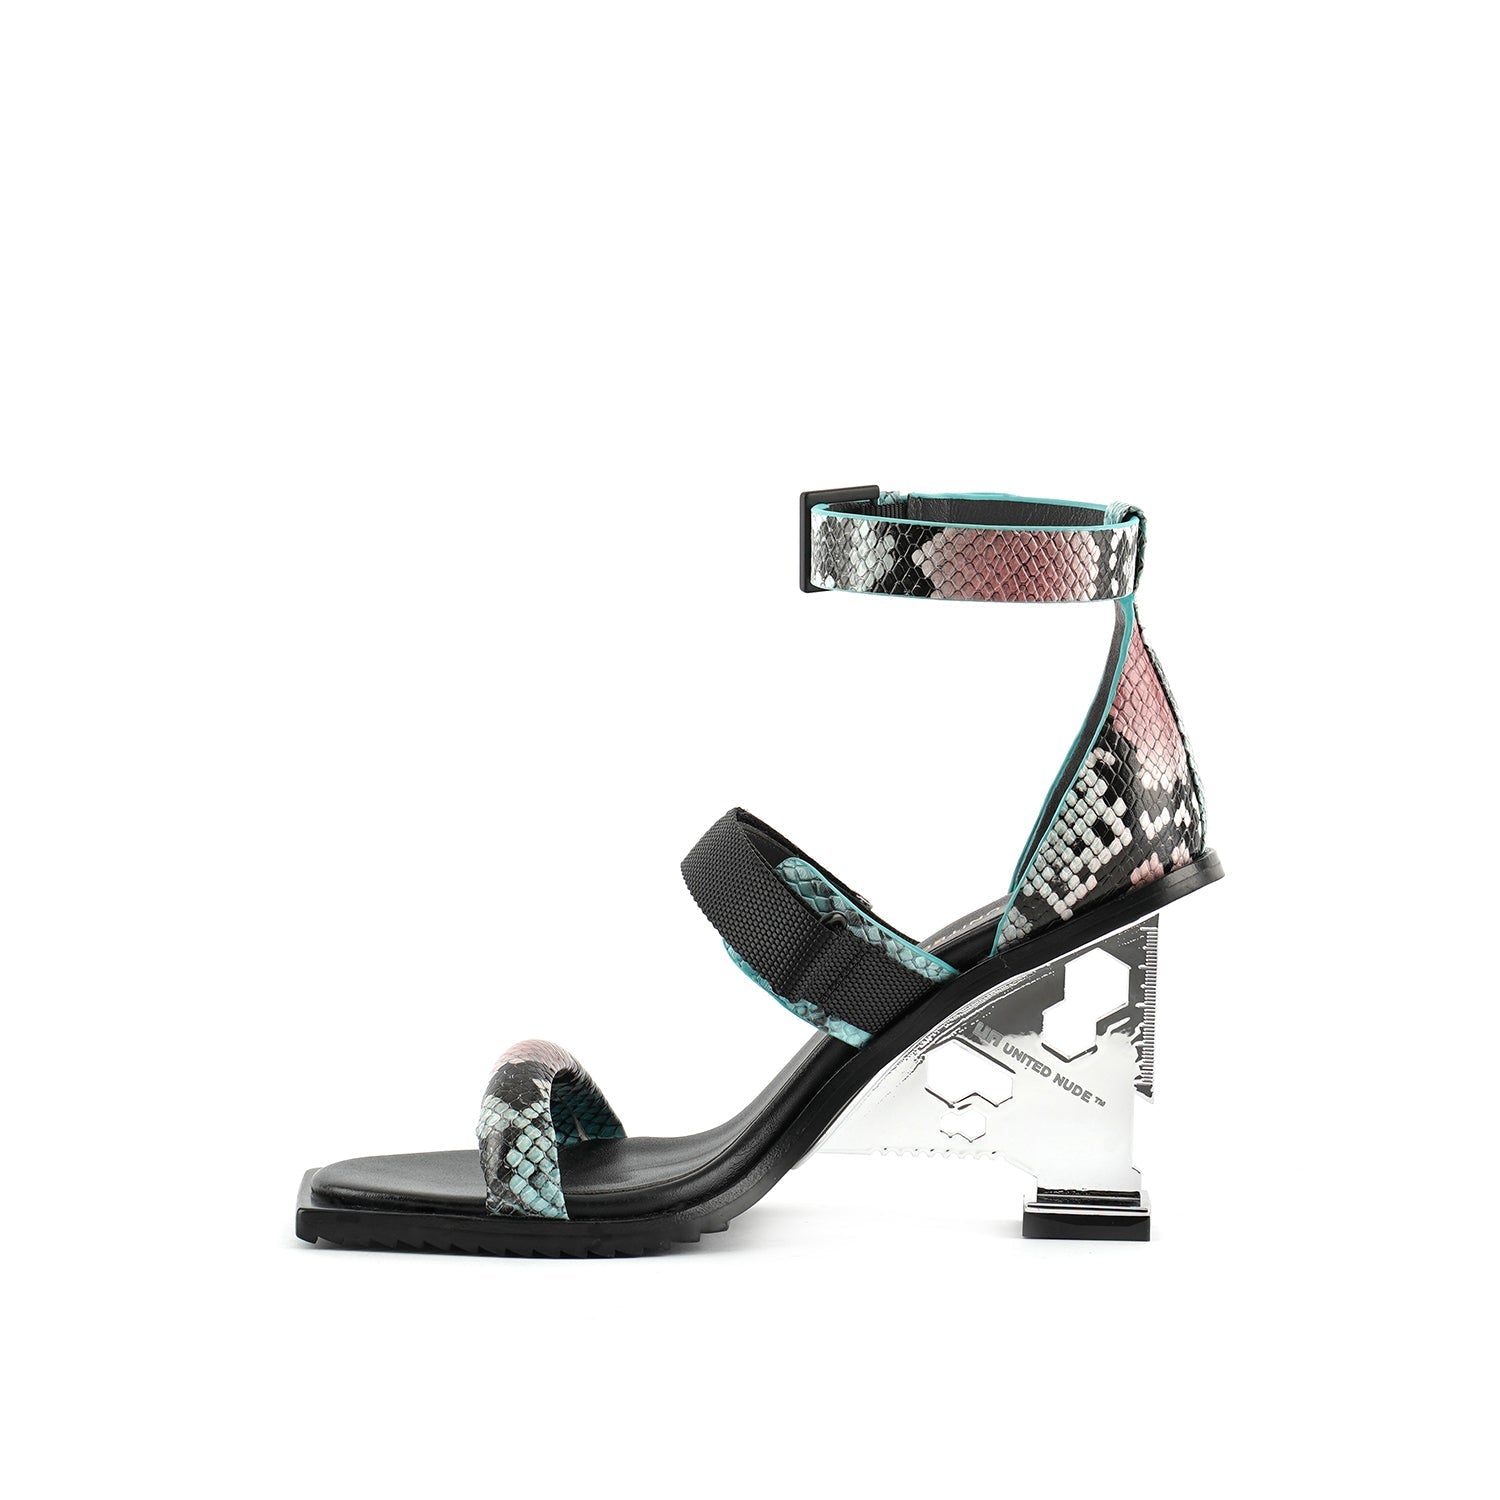 Inner side view of the united nude tool sandal in a coral and blue snake print. This high heel sandal has a tool-like heel and three straps - one over the toes, one over the instep, and one around the ankle.